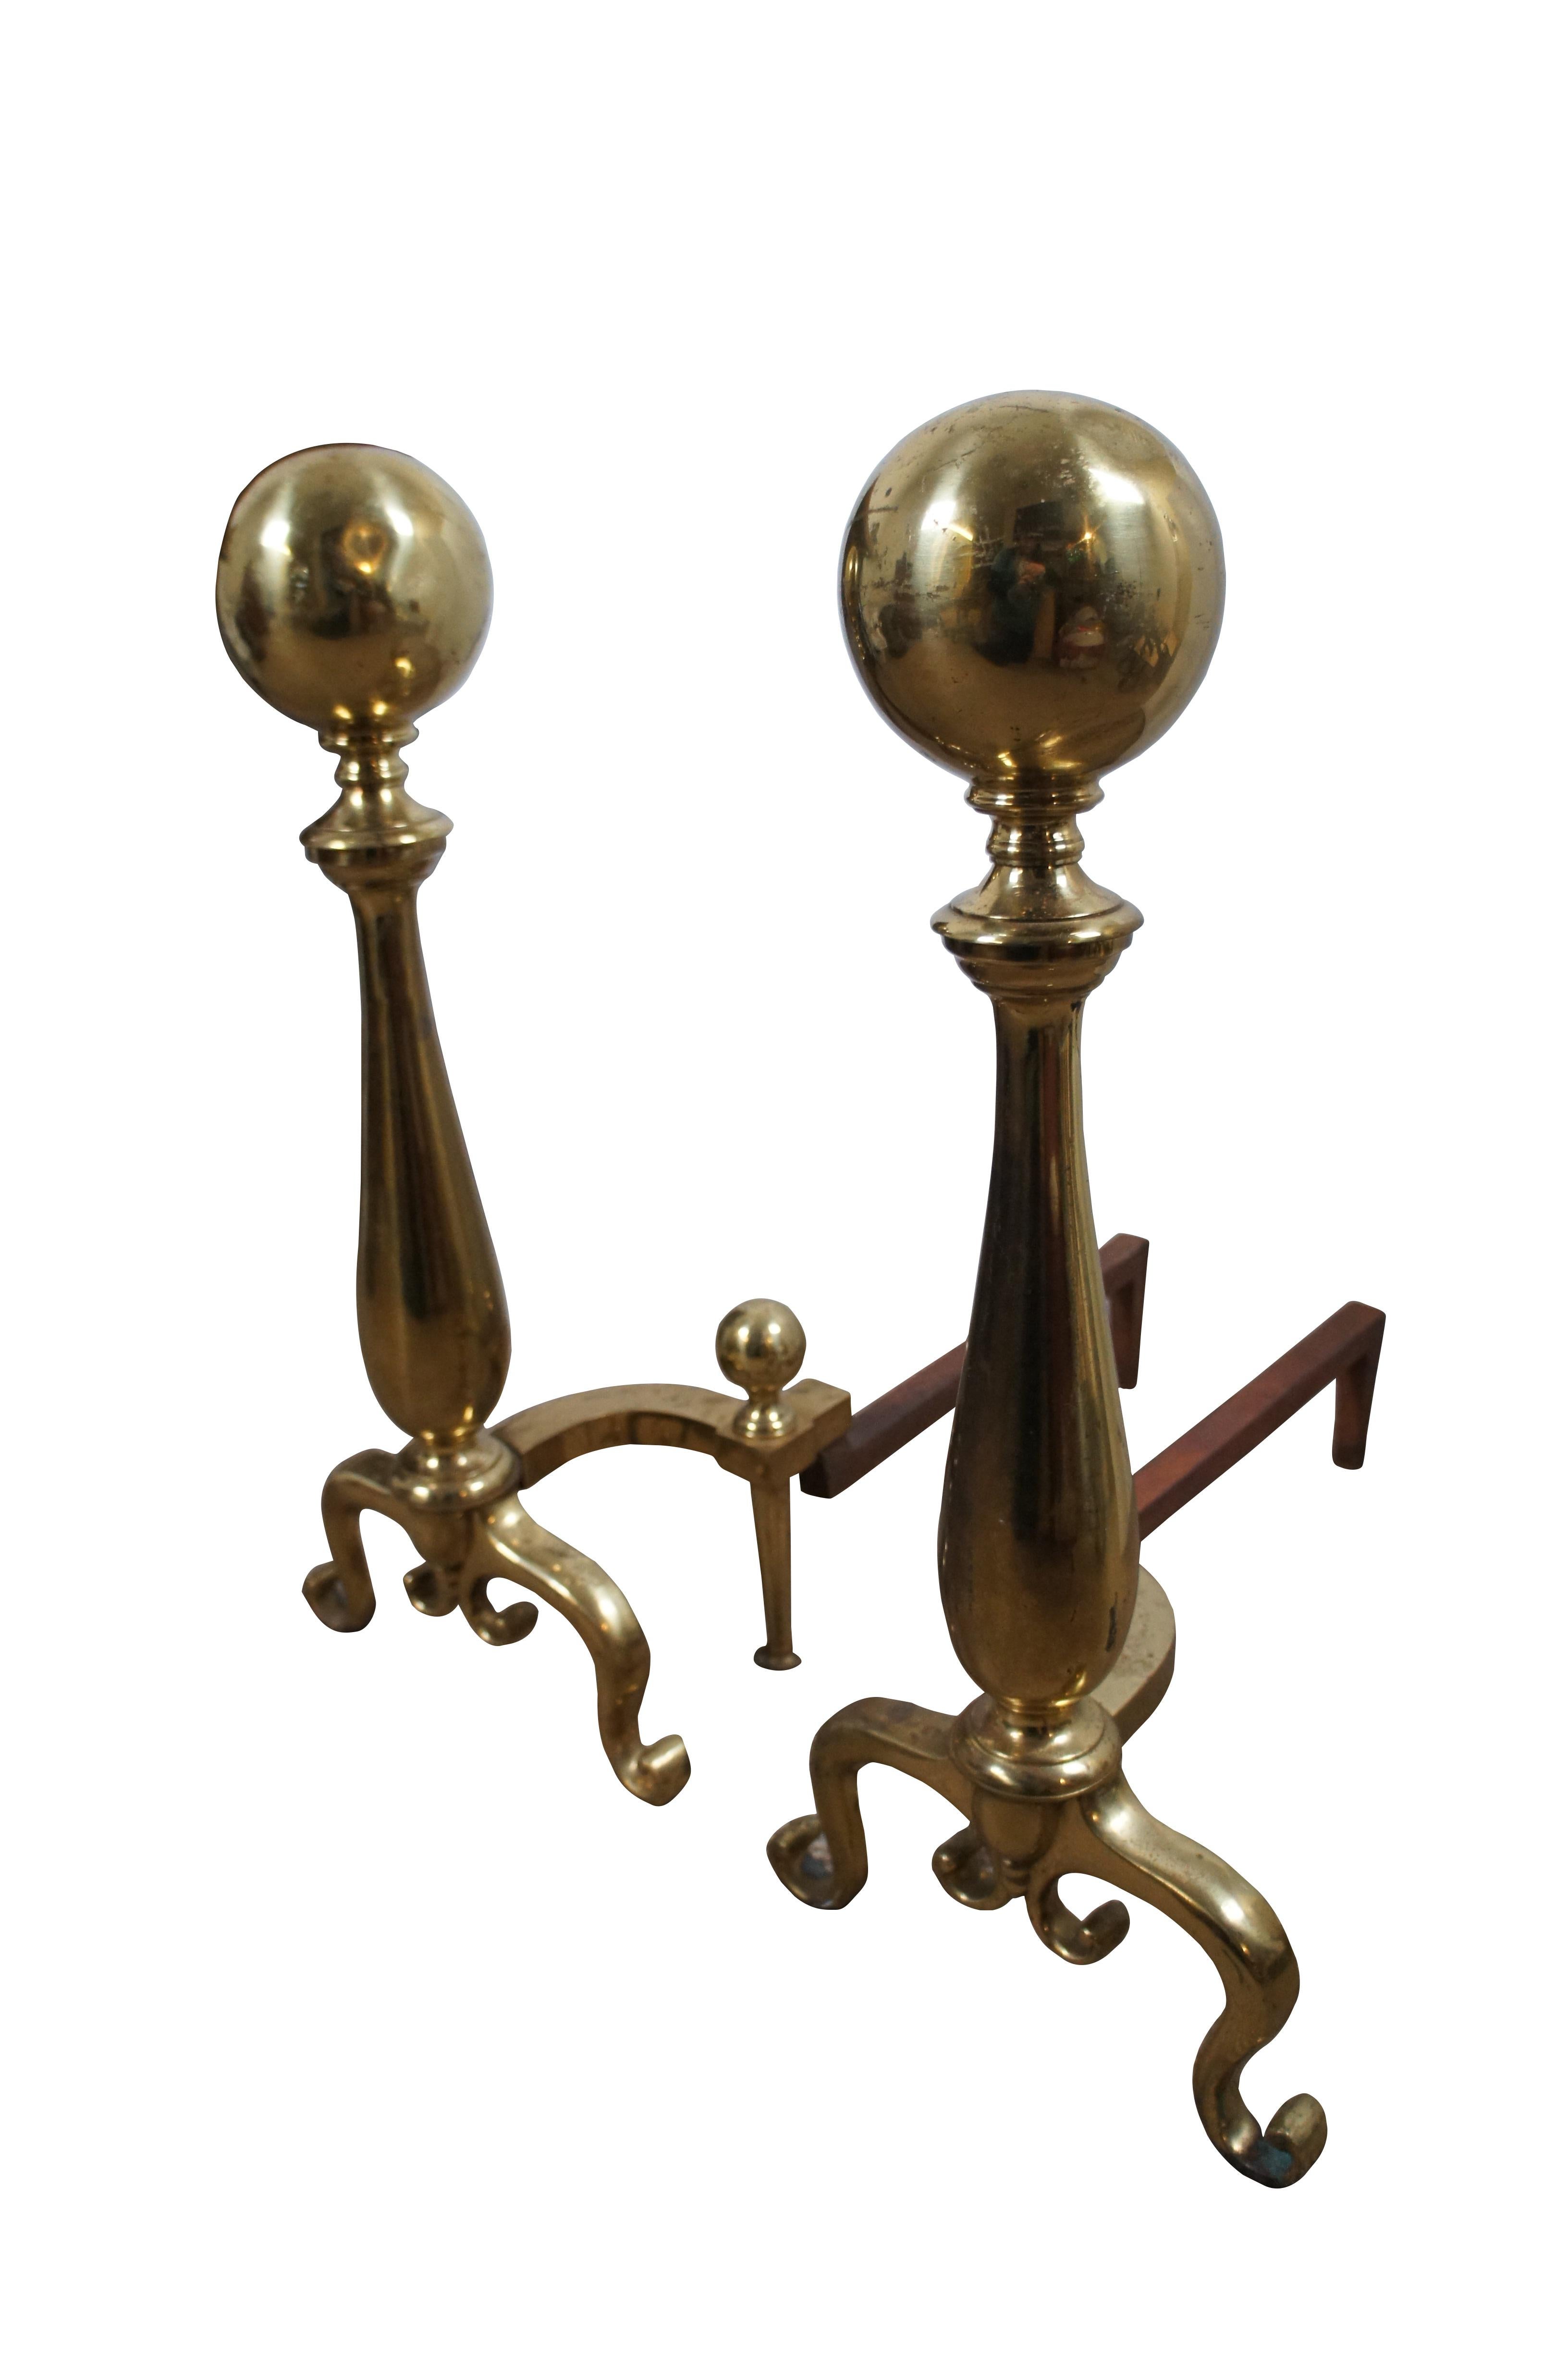 Large antique brass fireplace andirons featuring Colonial styling with scrolled feet and large cannonball tops . Iron legs marked 2GB.

Dimensions:
10.75